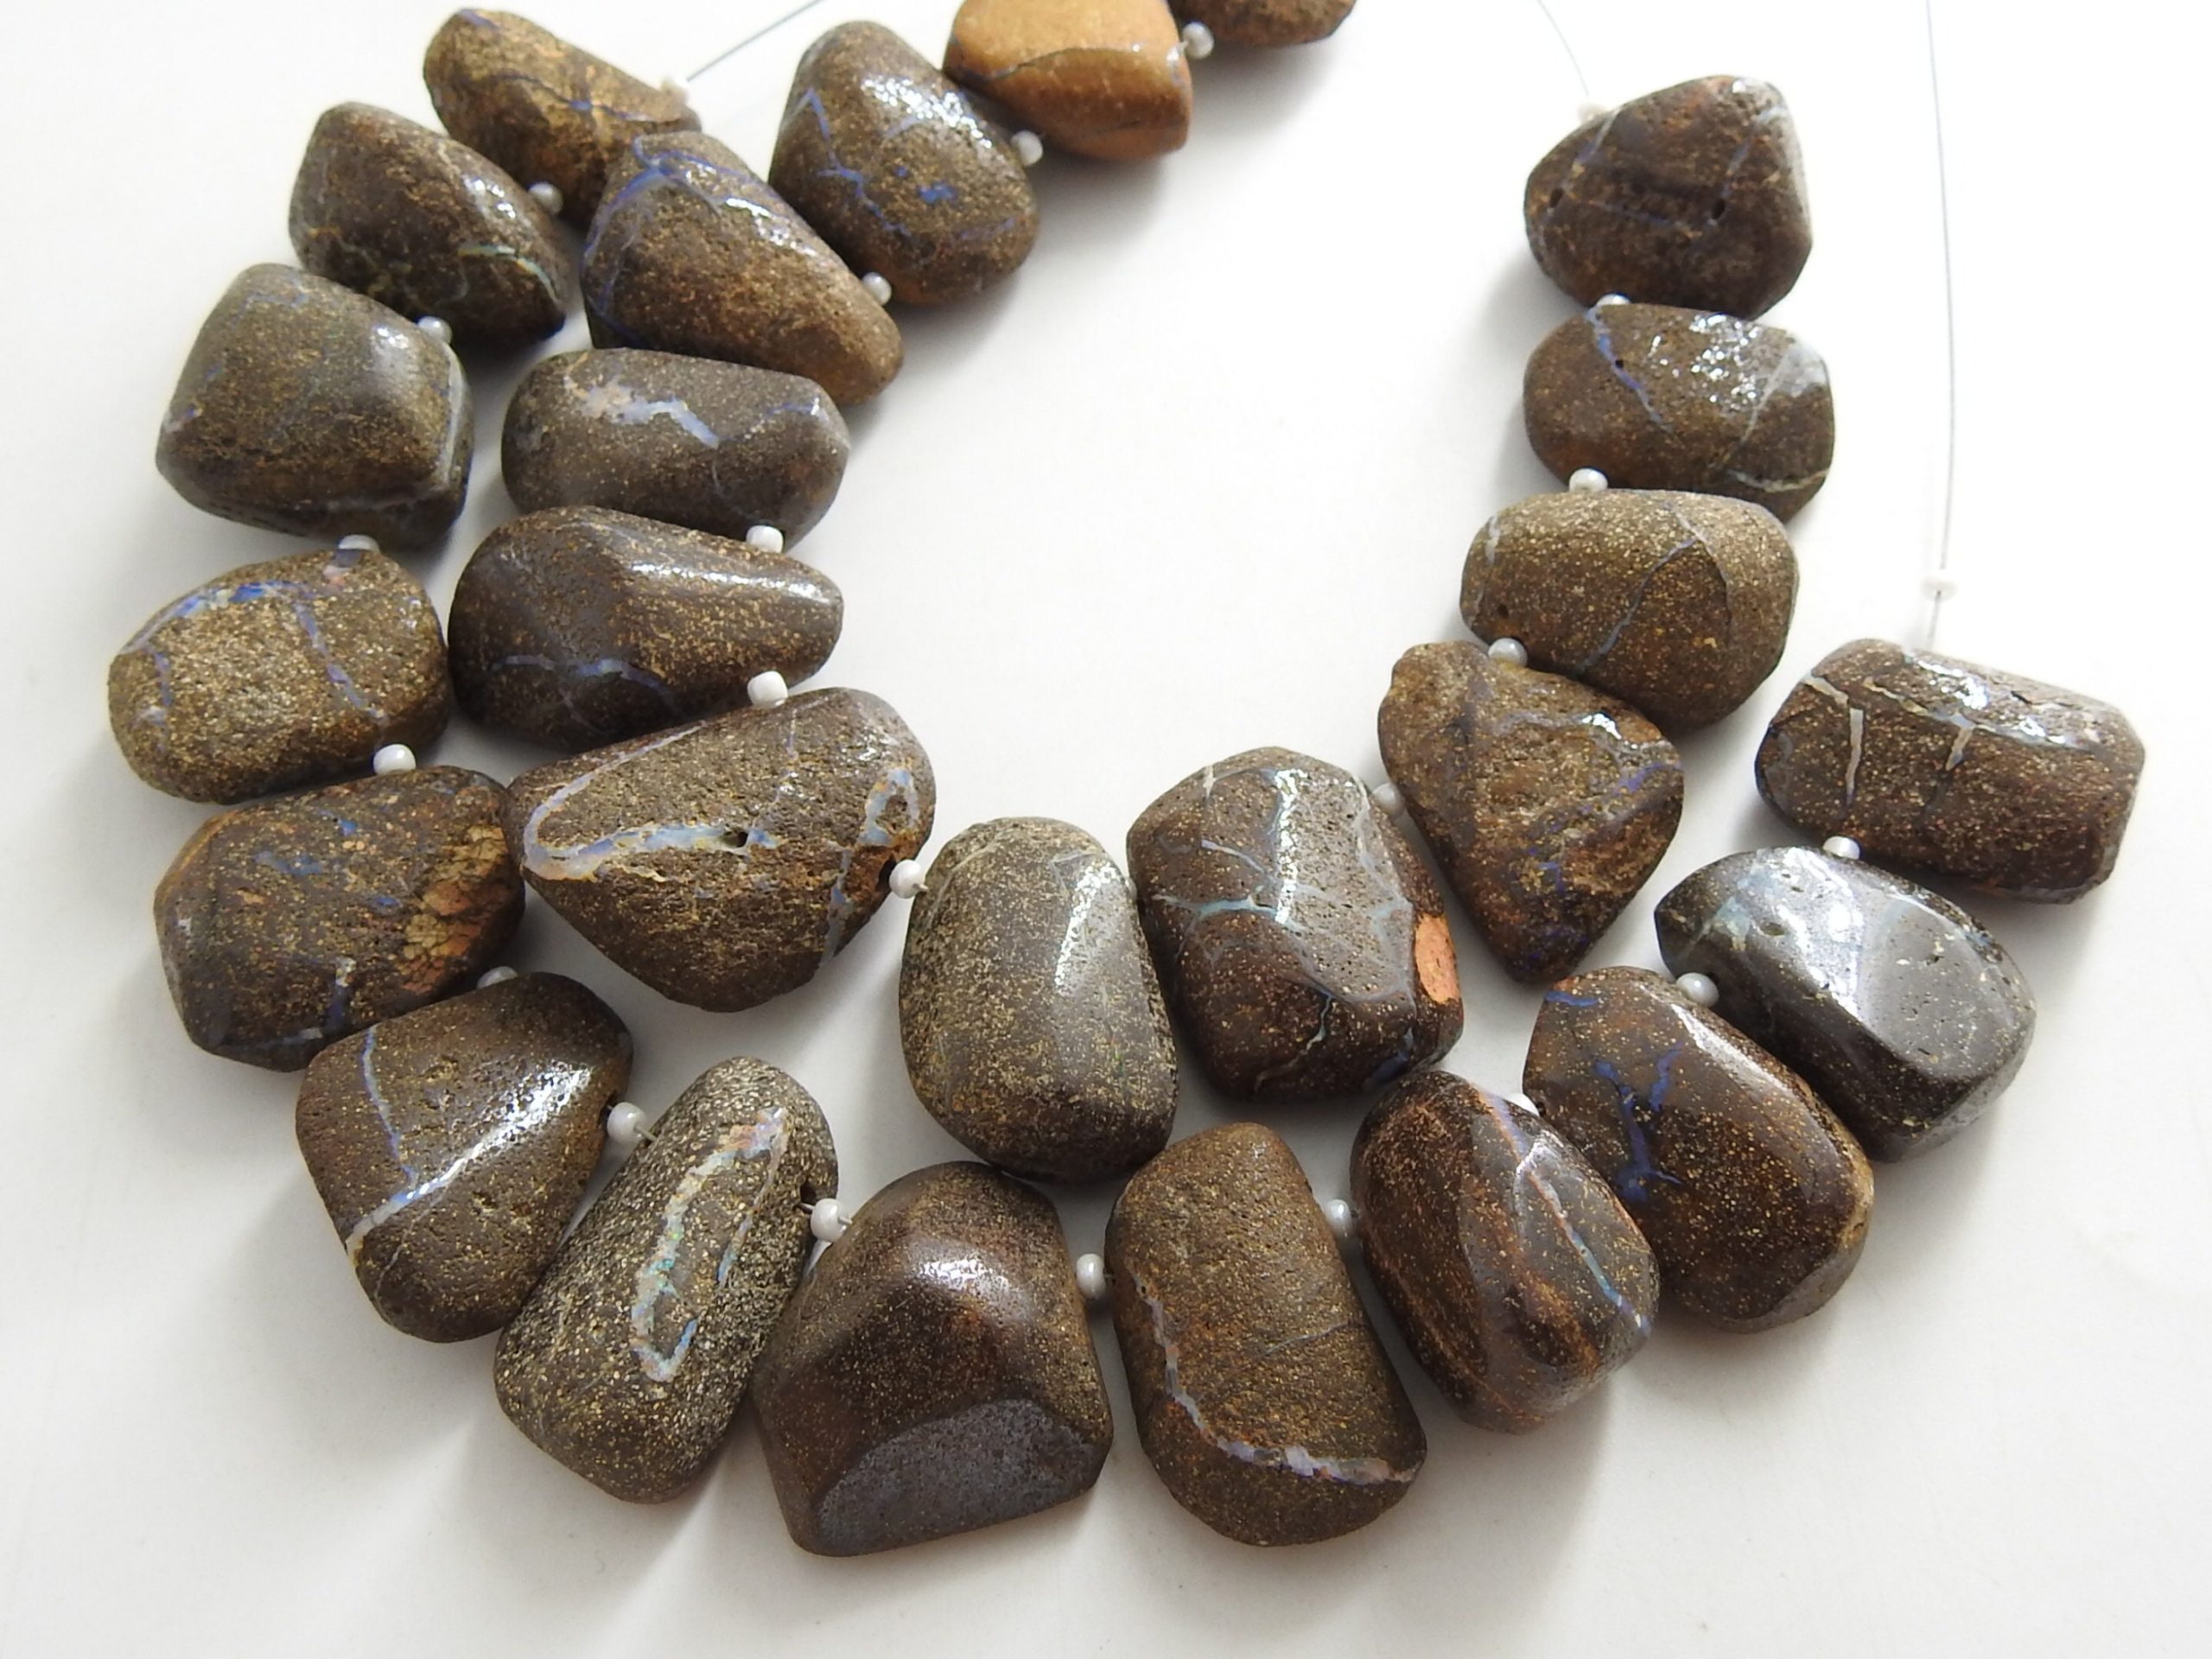 100%Natural Boulder Opal Smooth Fancy Briolette,Tumbke,Nugget,Irregular Shape Bead,Loose Stone,Minerals,Multi Fire 13Piece Strand (WM)R1 | Save 33% - Rajasthan Living 19